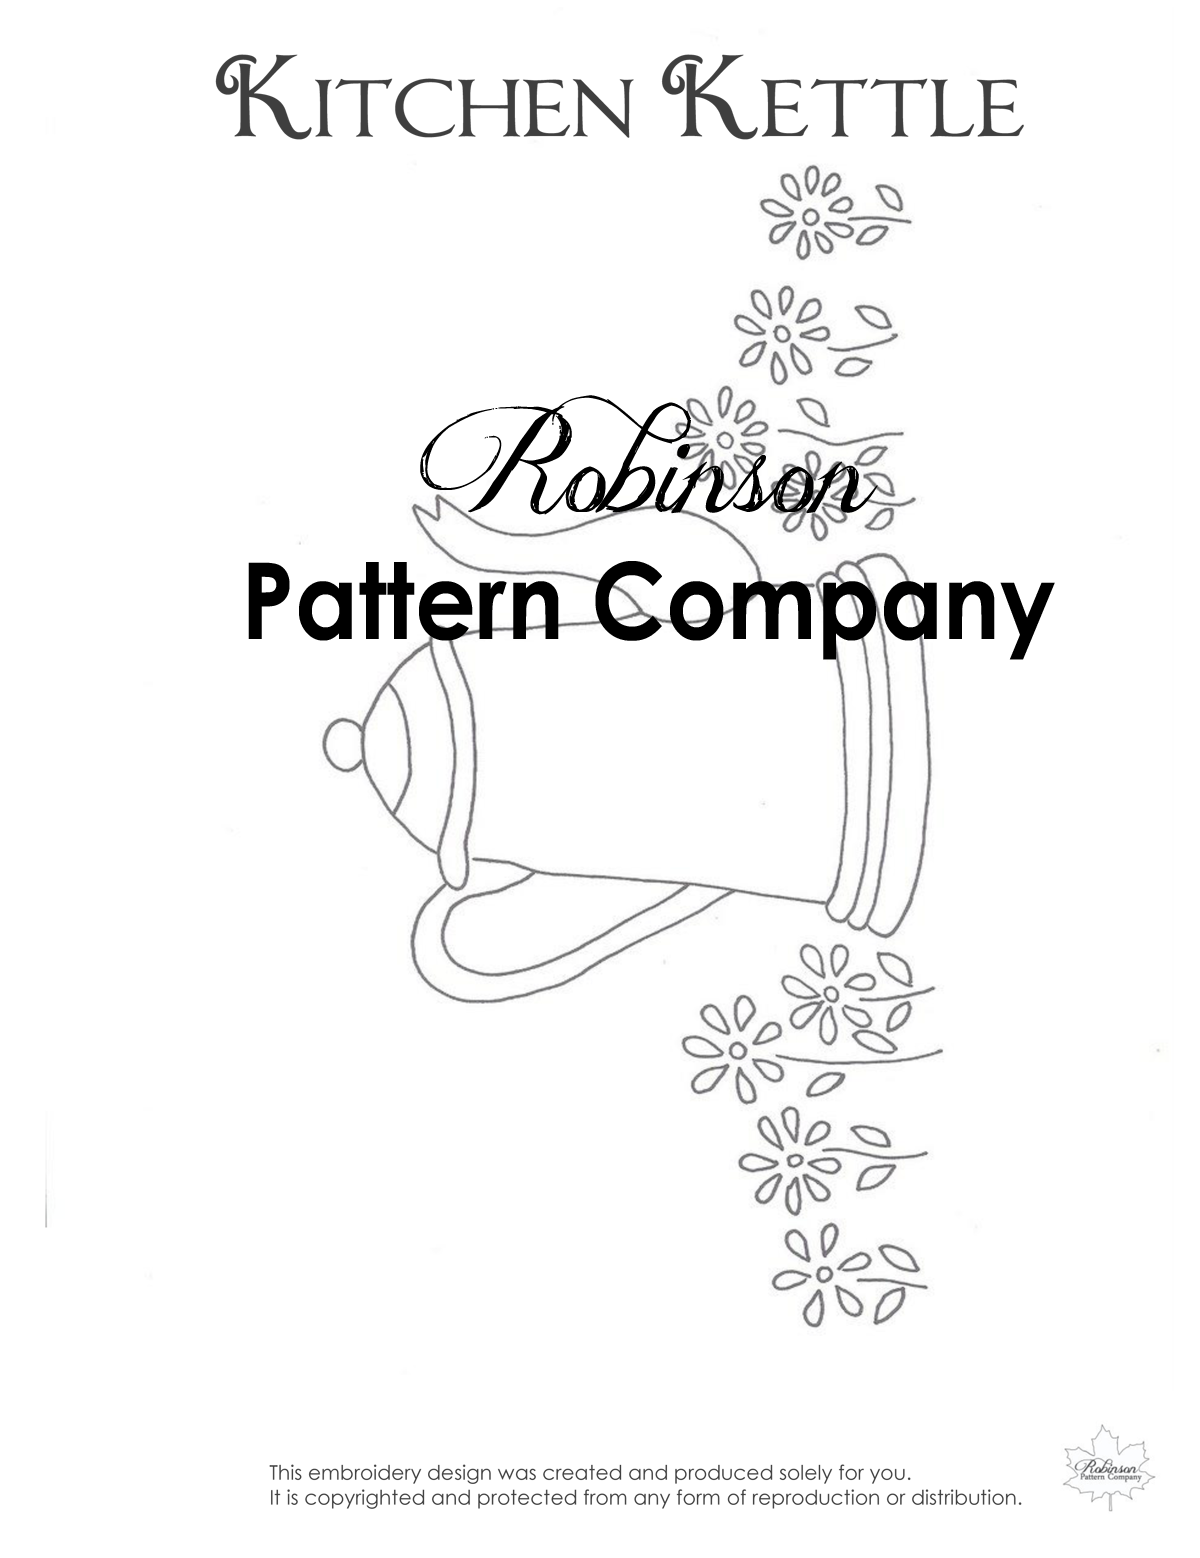 Kitchen Kettle Hand Embroidery pattern